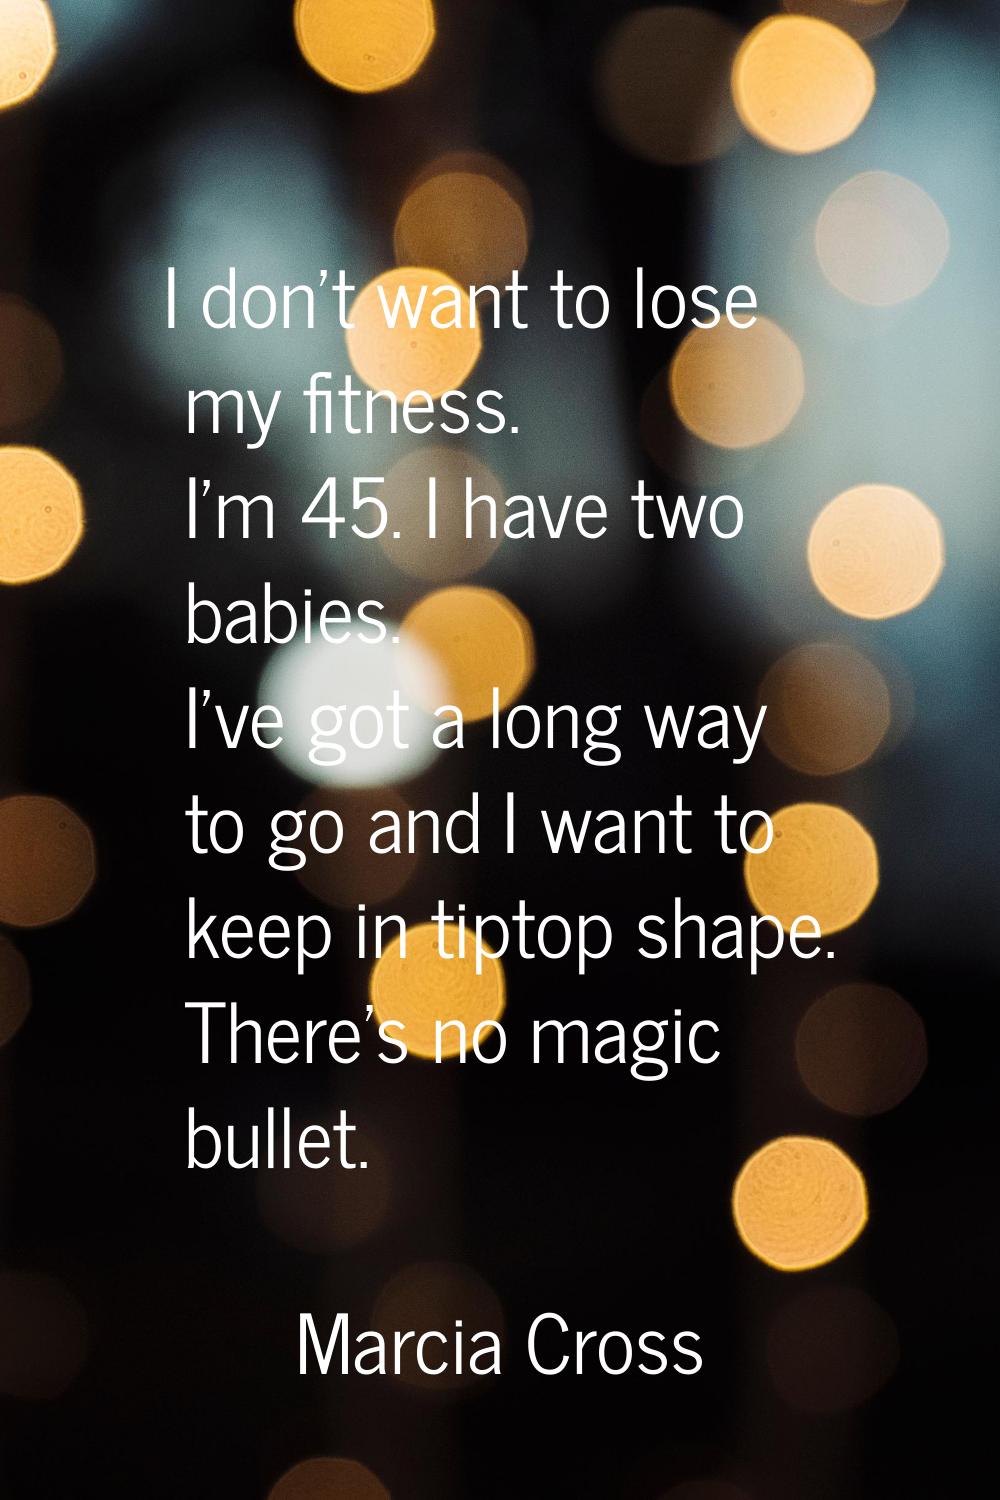 I don't want to lose my fitness. I'm 45. I have two babies. I've got a long way to go and I want to